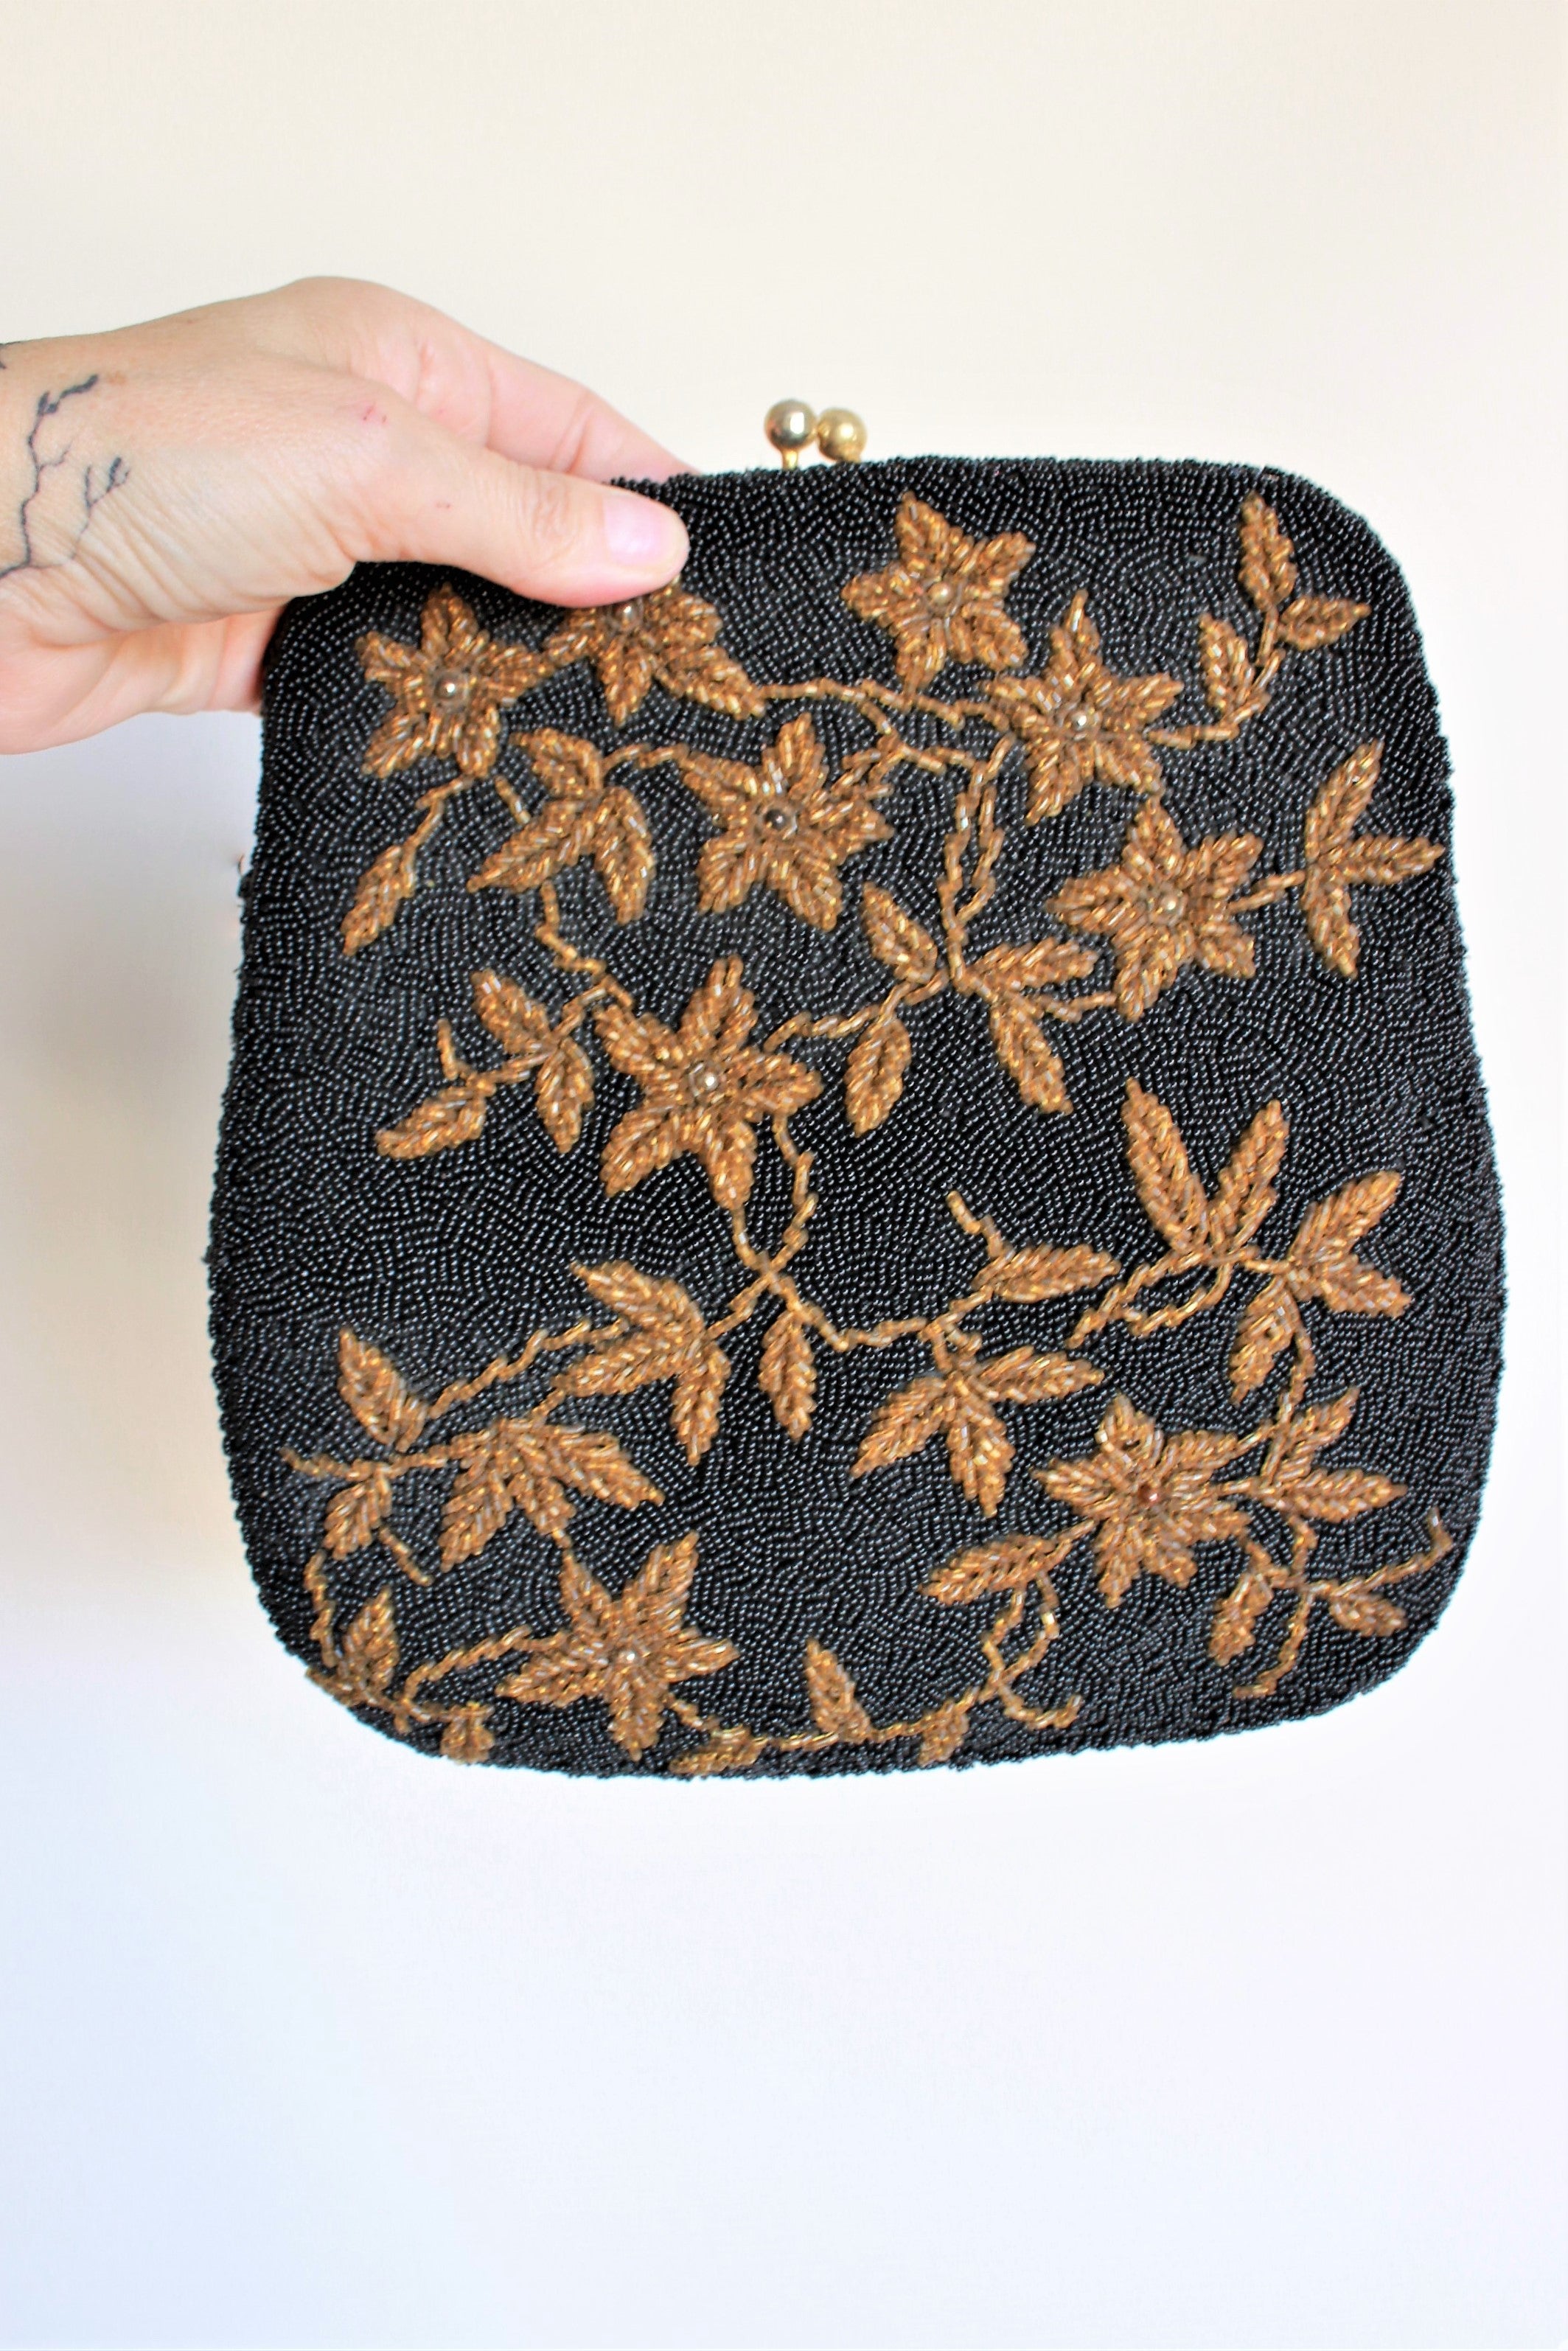 Vintage Beaded Floral Clutch — Nightingale Supply Co.